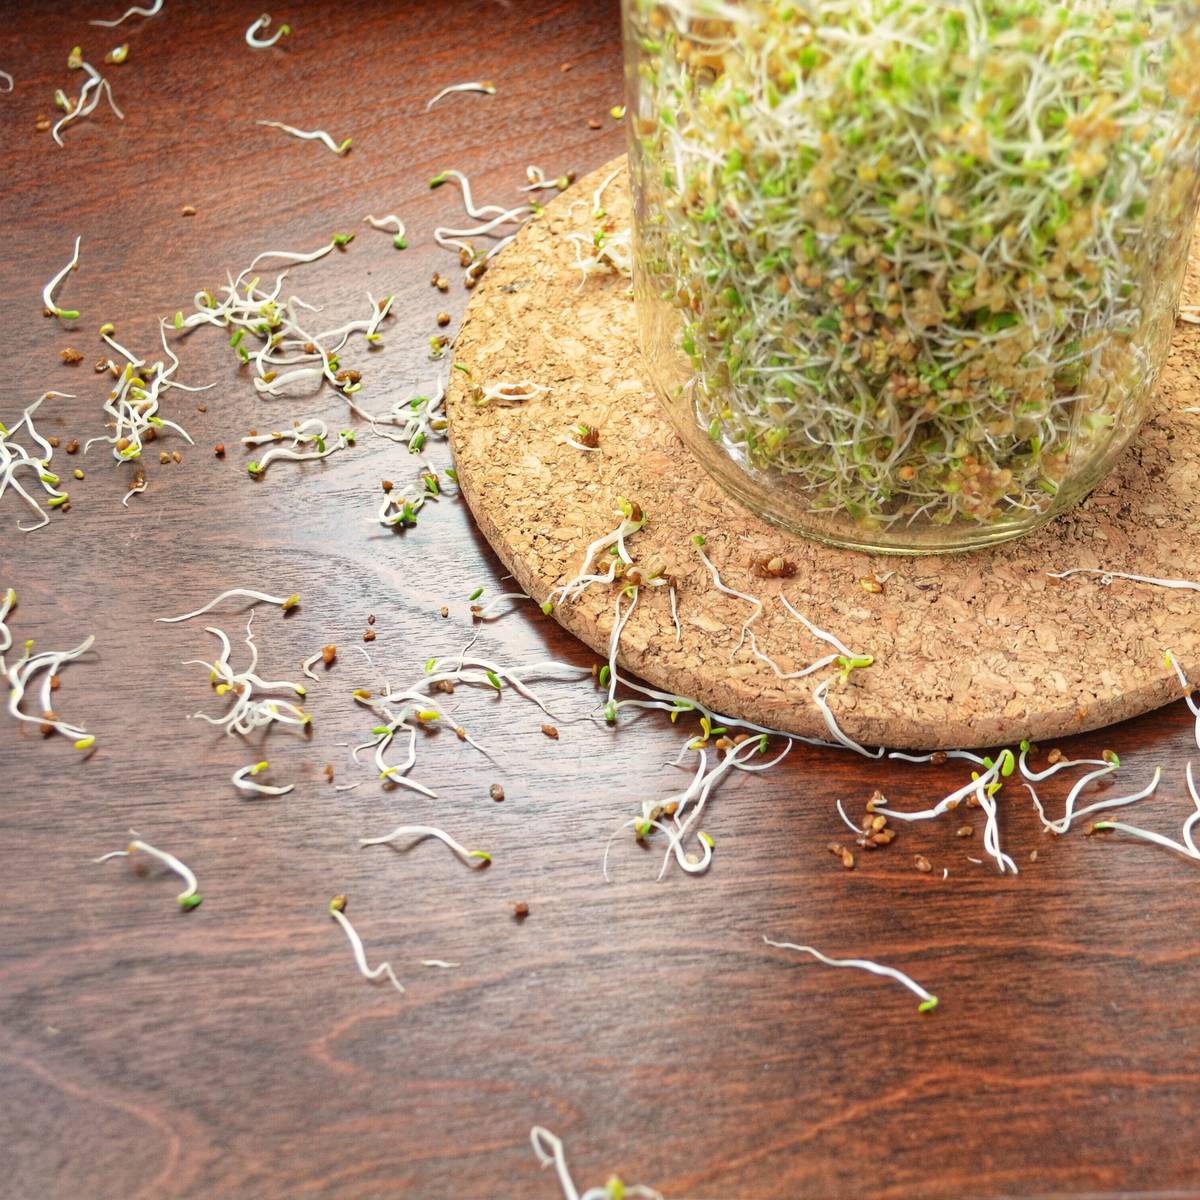 The botton of teh mason jar with the alfalfa sprouts.